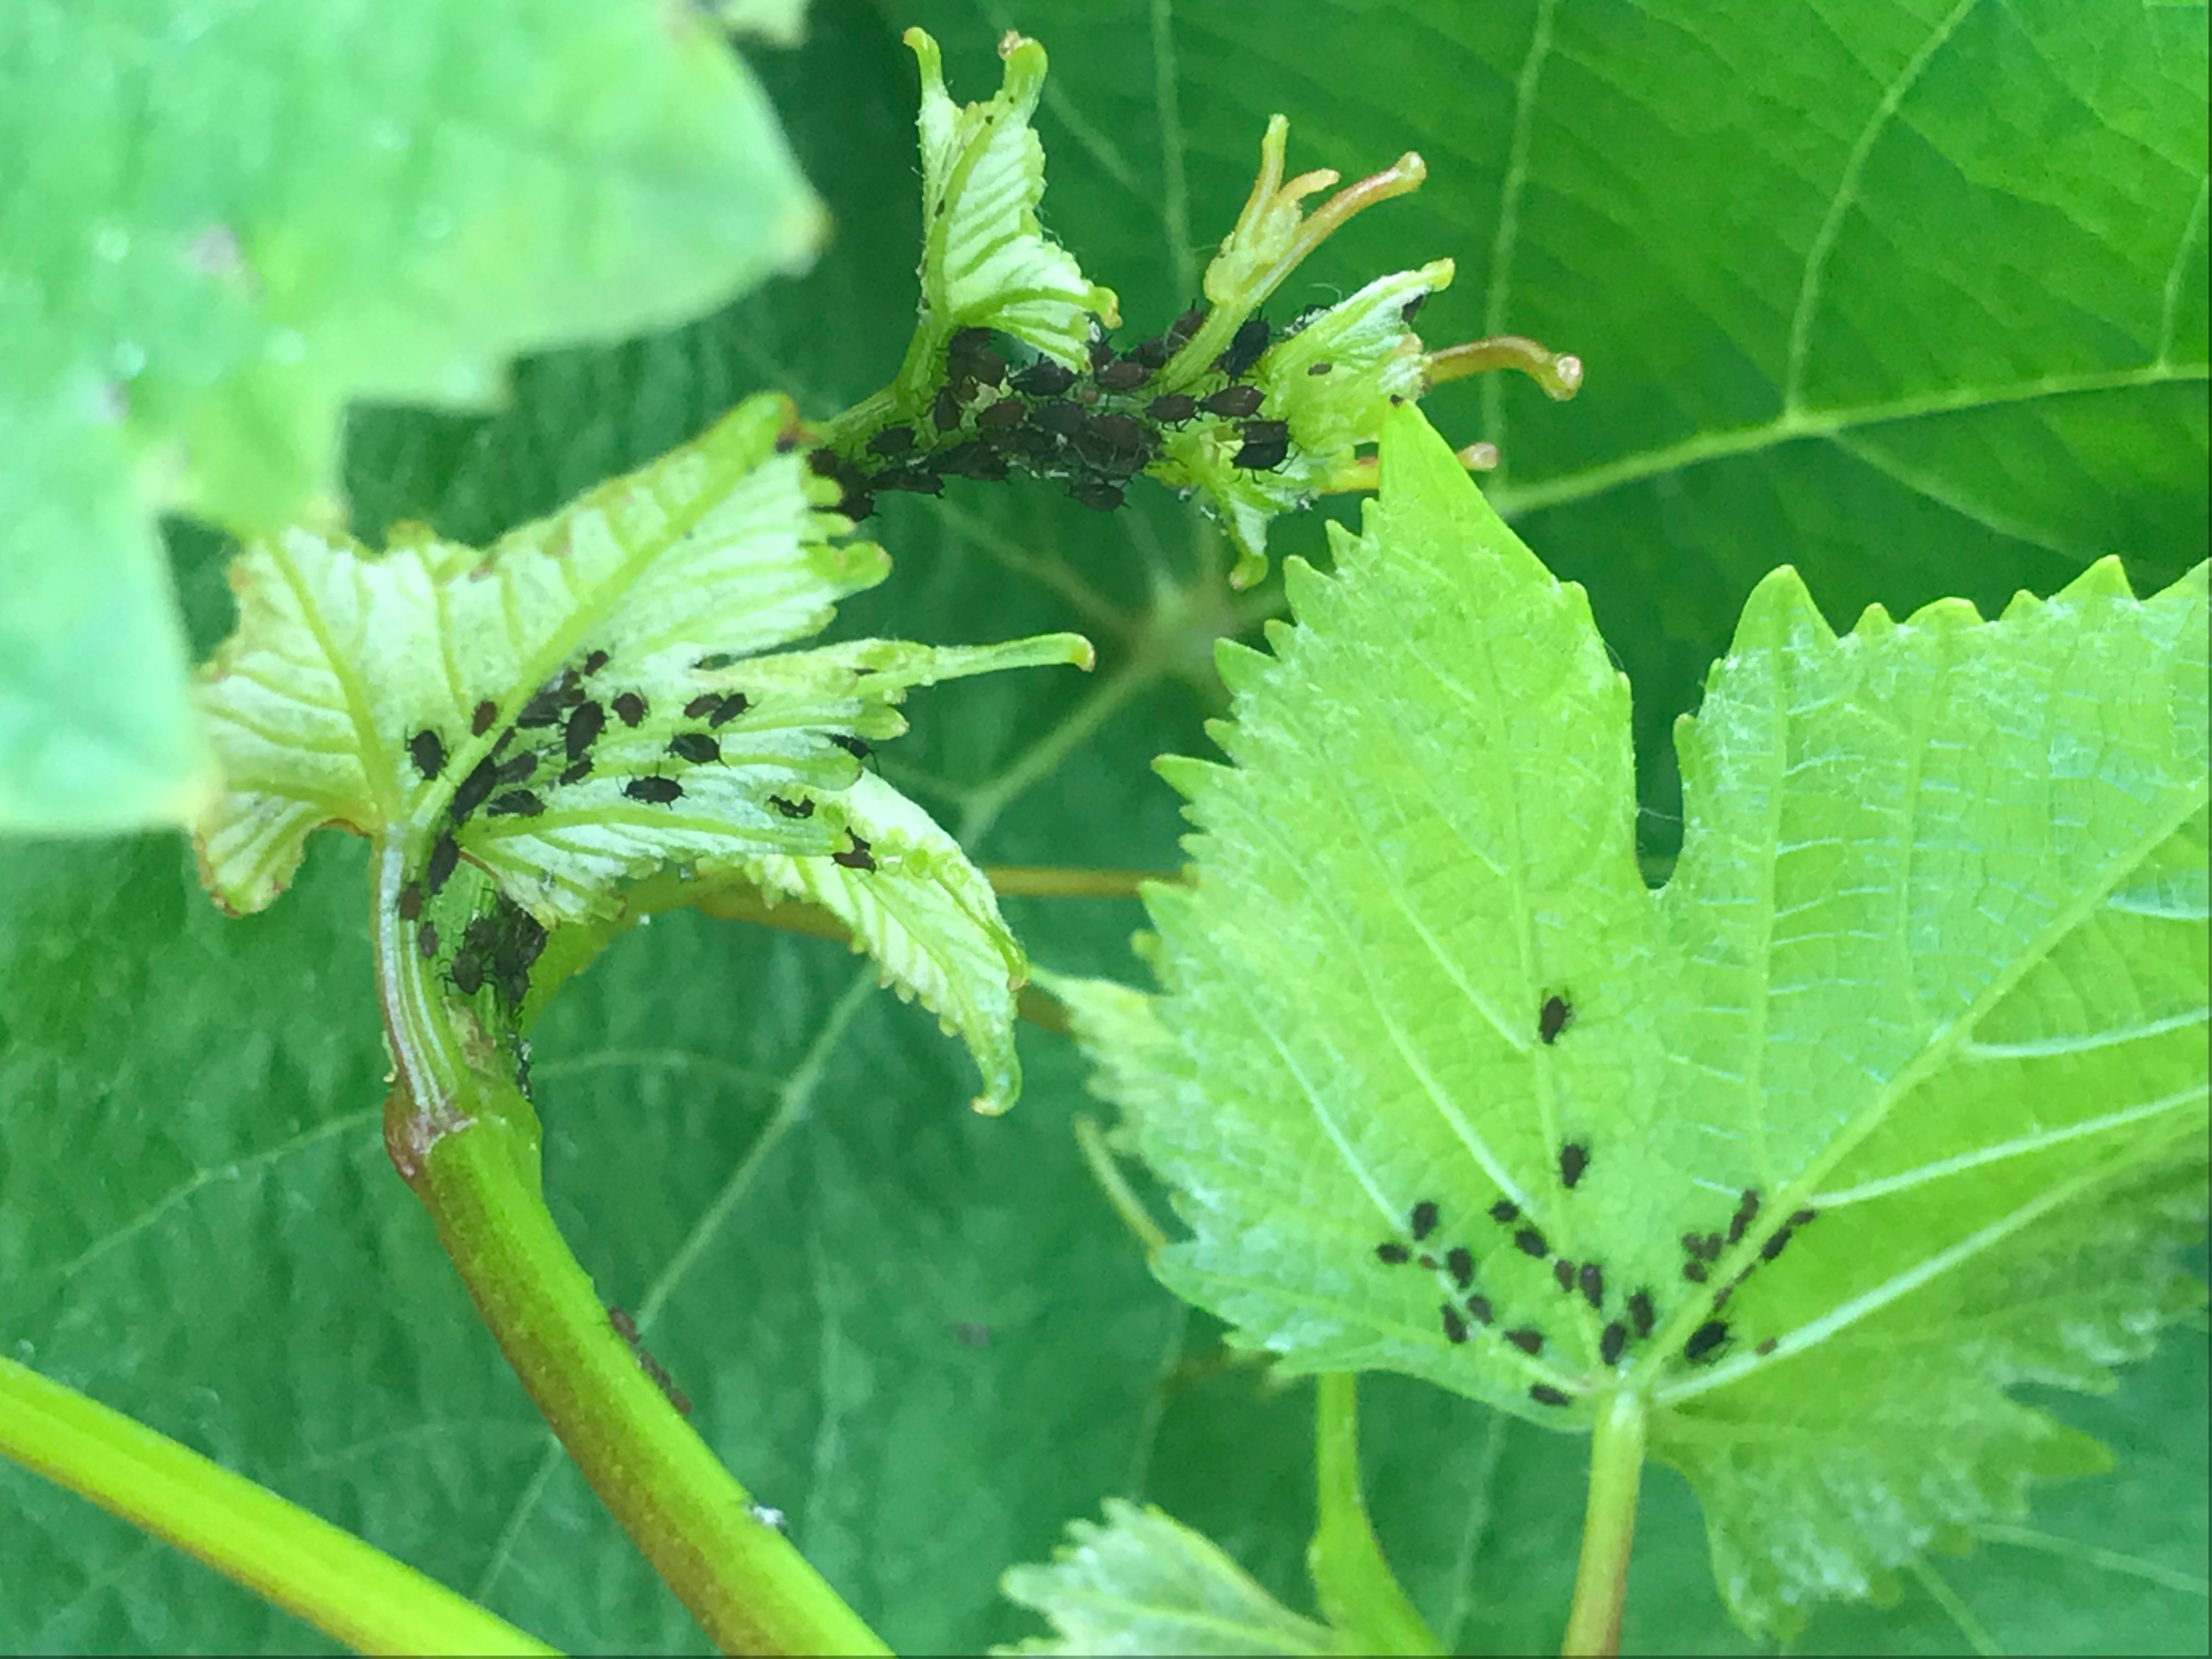 Aphids feeding on shoot tip